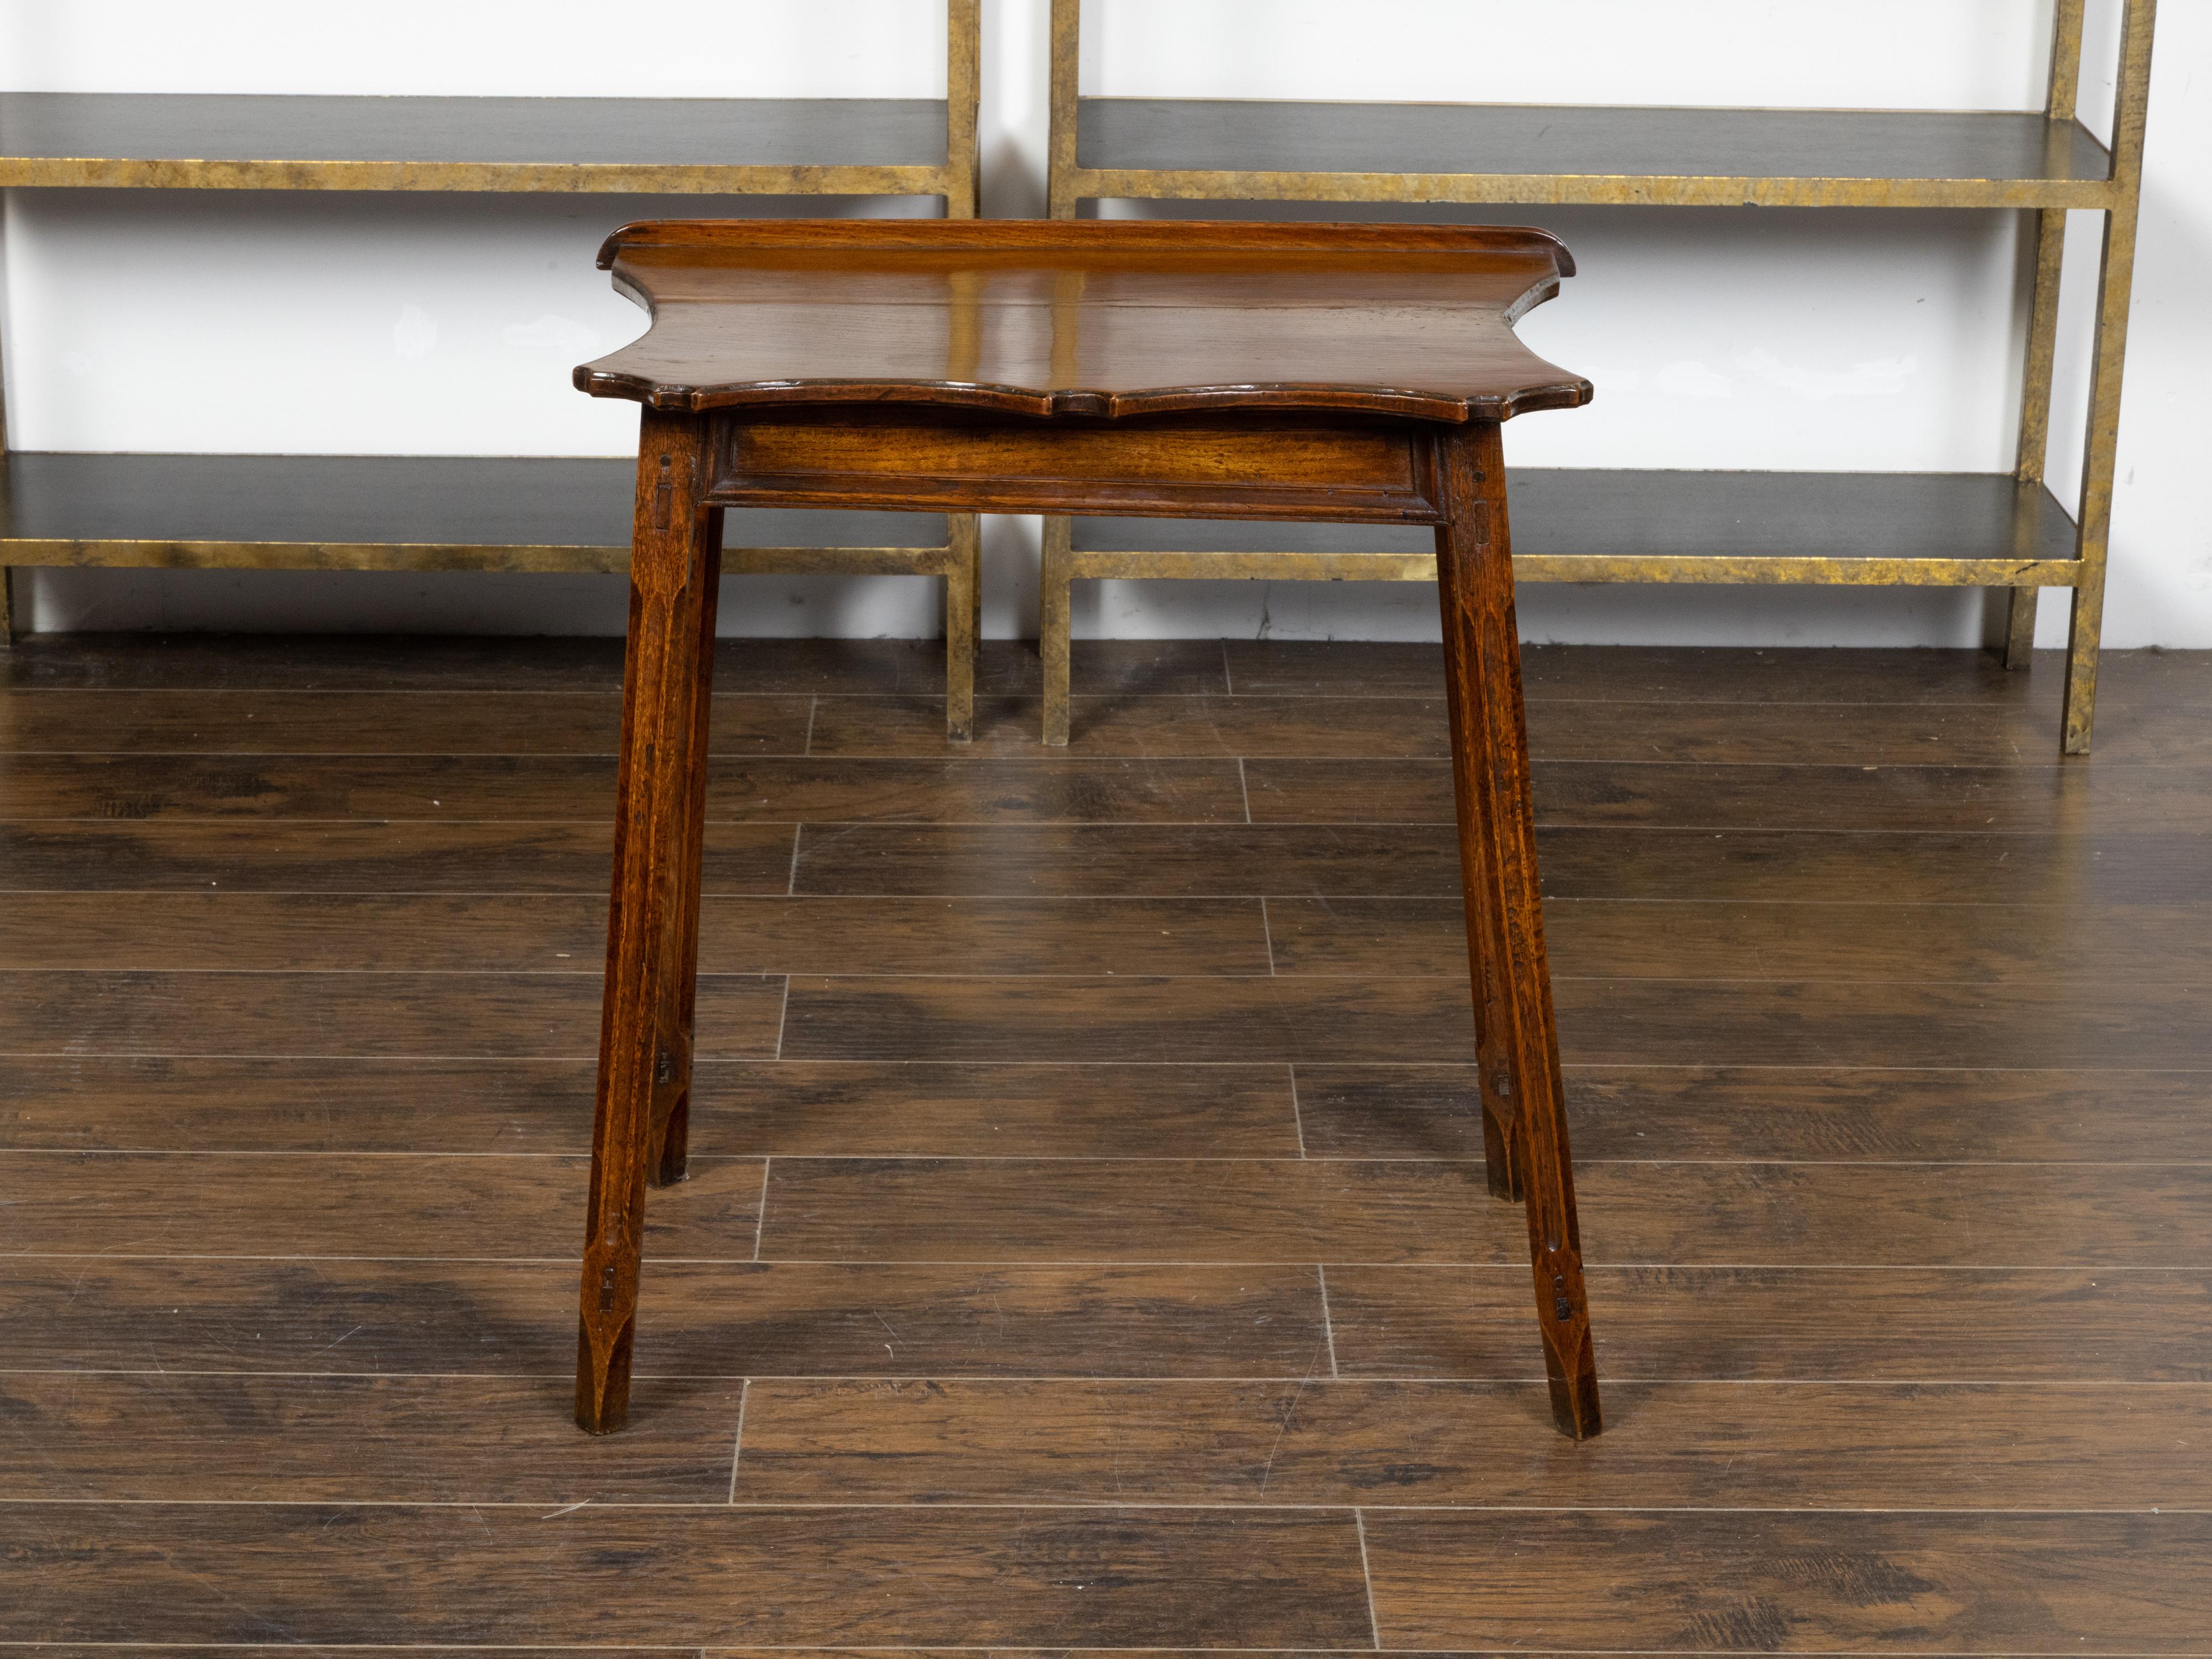 An English carved oak side table from the 19th century, with lift top, serpentine front, slender fluted legs, weathered appearance and peg construction. Created in England during the 19th century, this small oak side table charms us with its